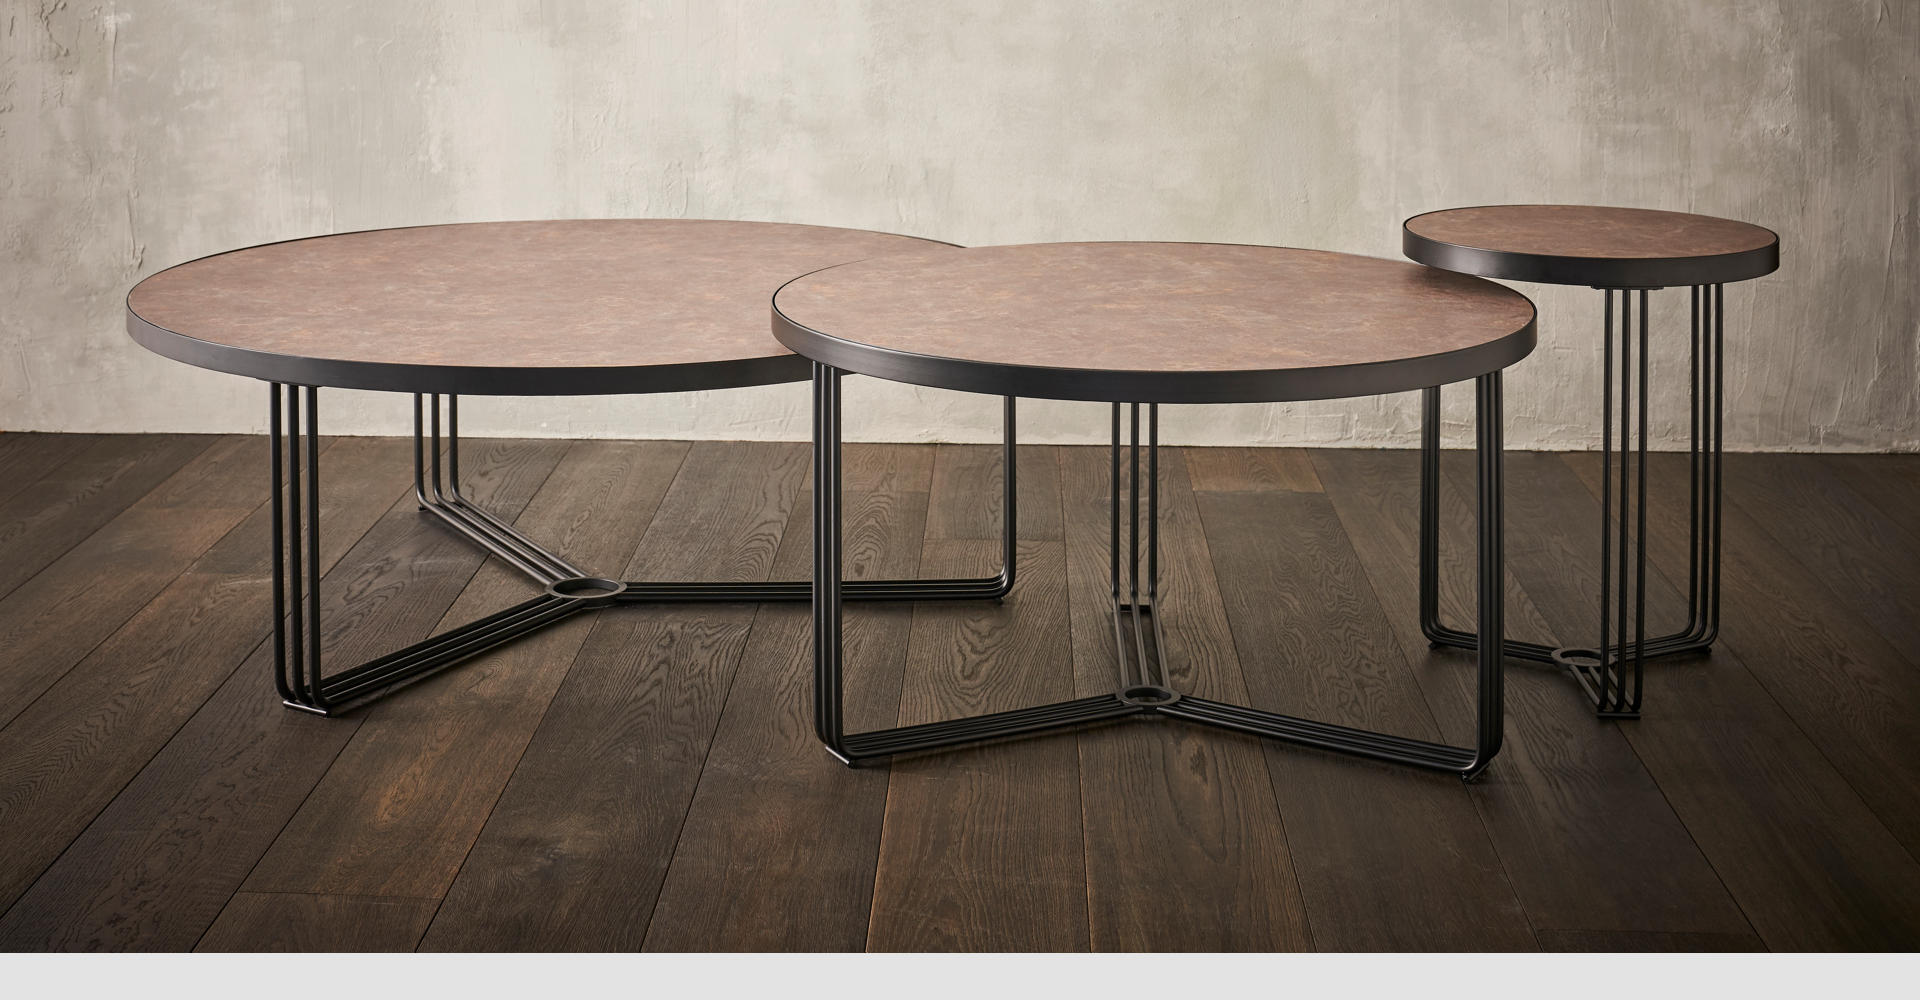 Finn Nested Coffee & Side Tables With Black Frames & Dark Wood Laminate Tops © GillmoreSPACE Ltd